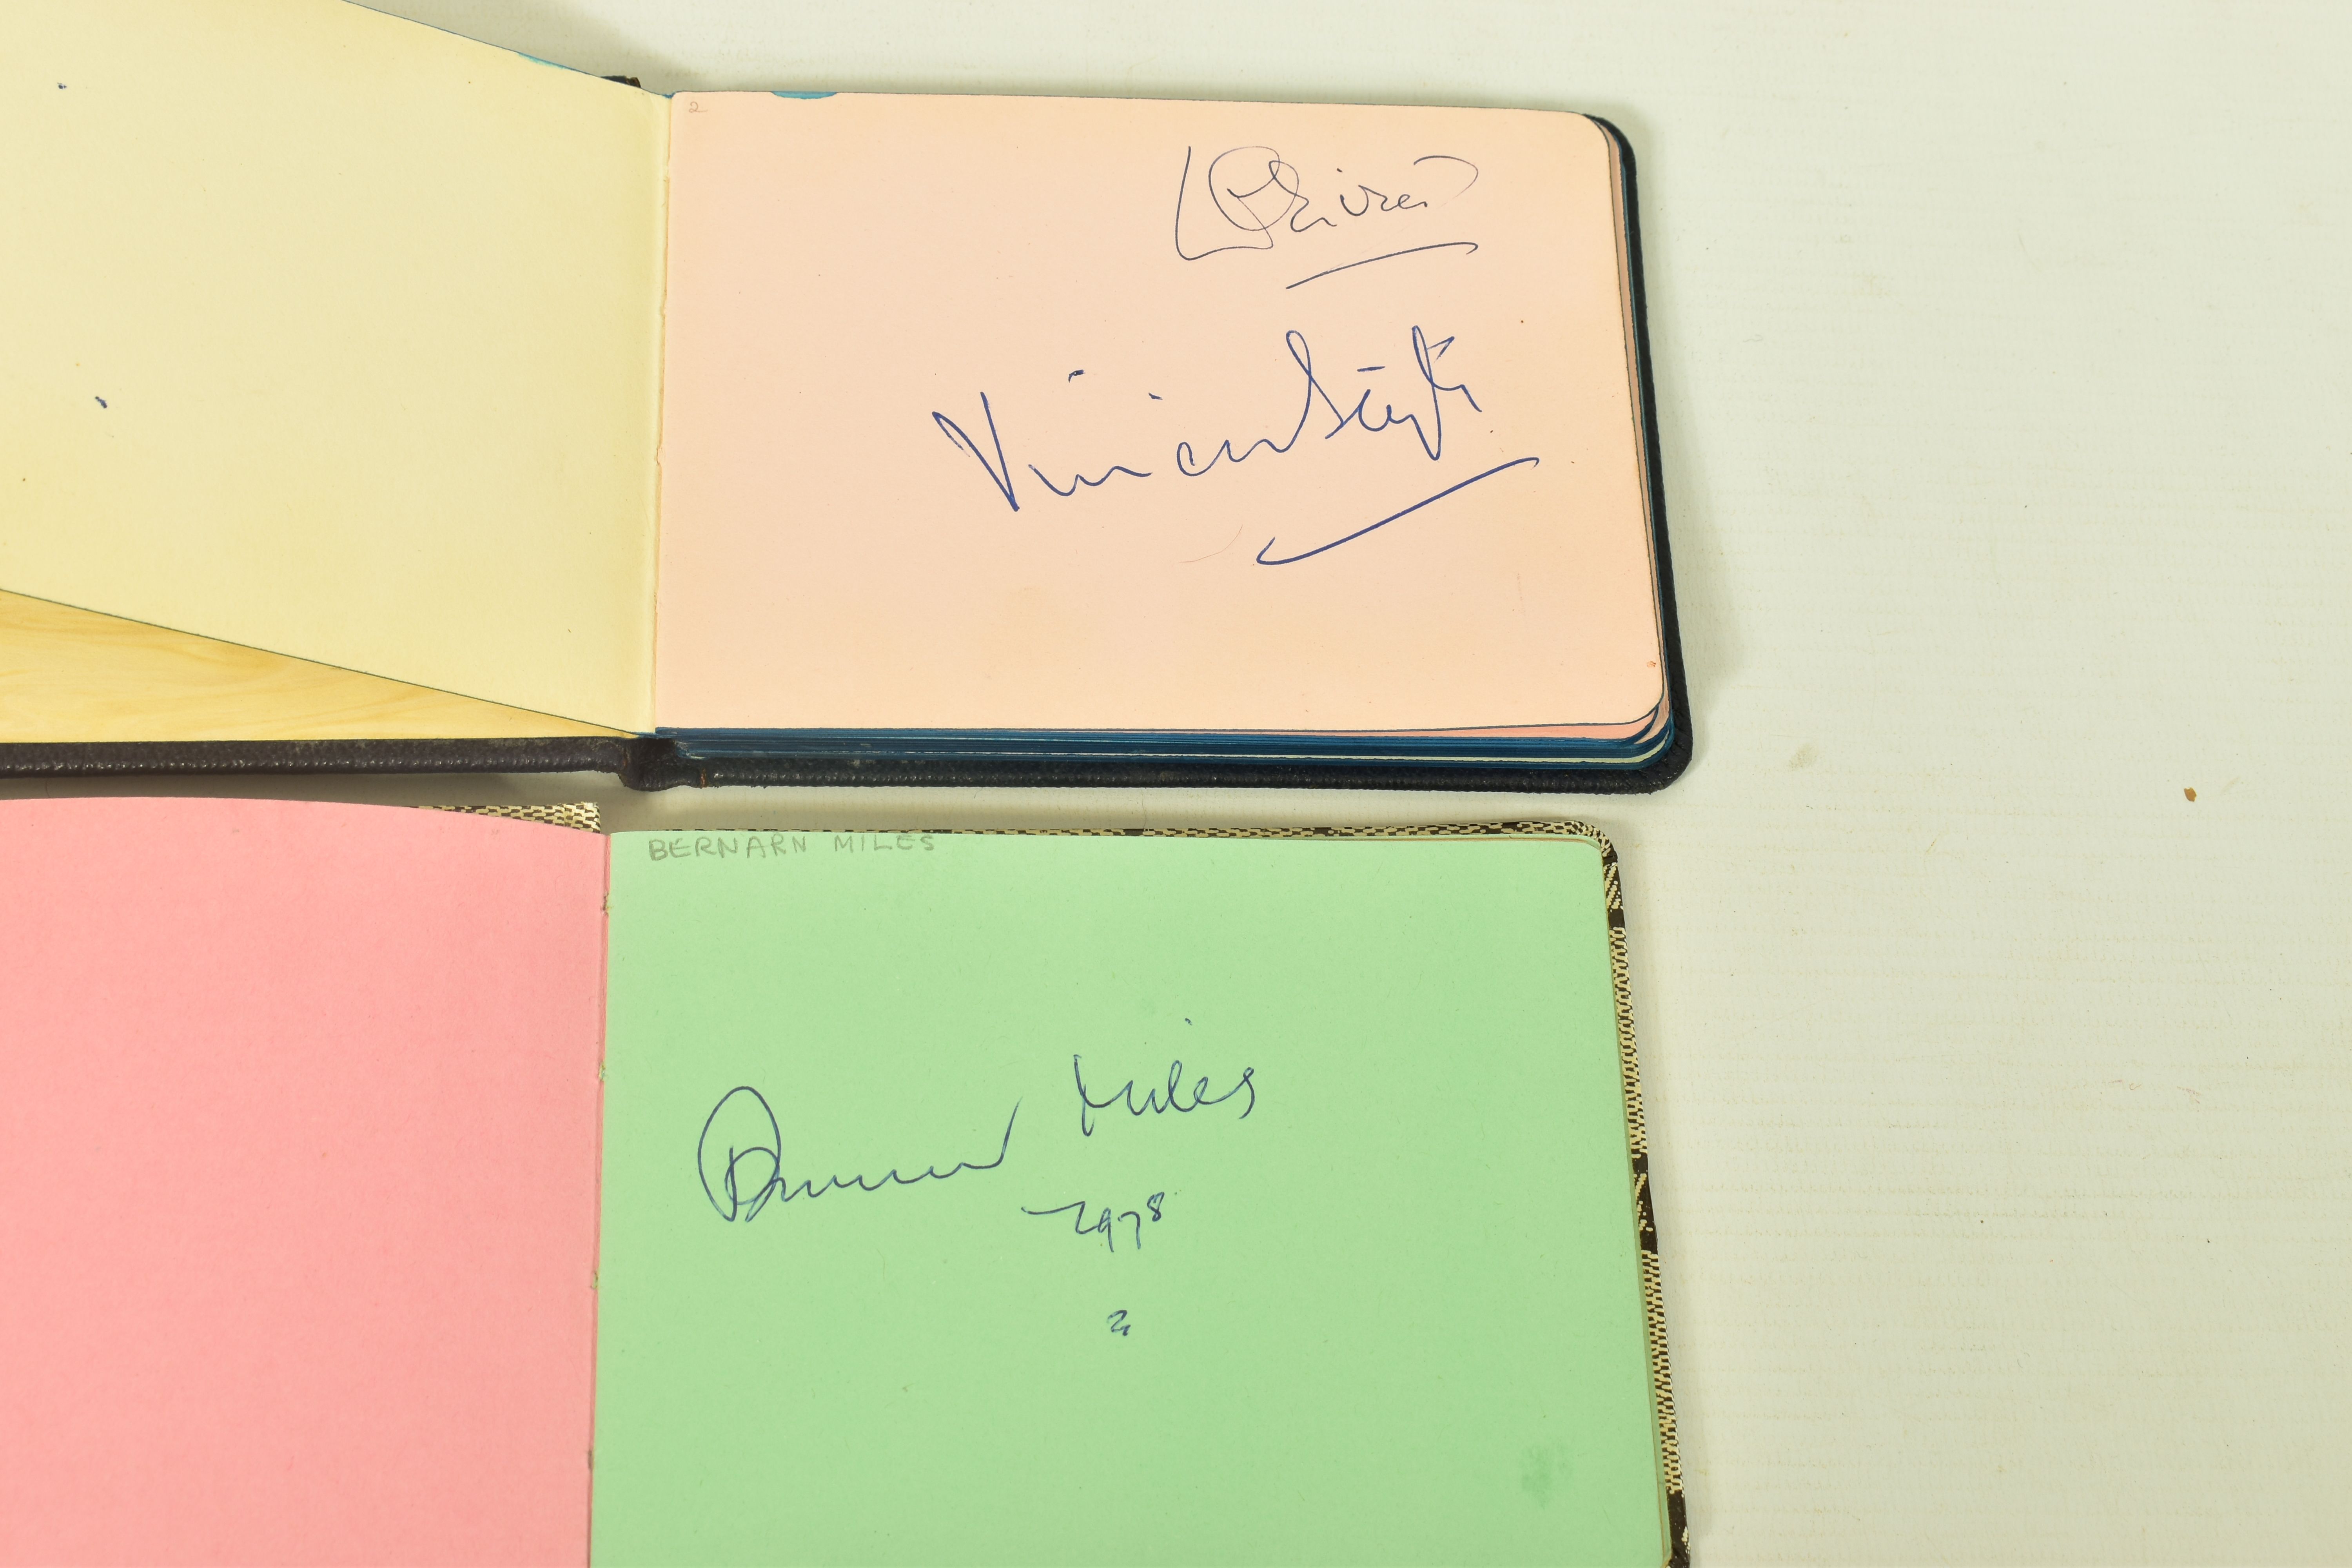 FILM & STAGE AUTOGRAPH ALBUM, a collection of signatures in two autograph albums featuring some of - Image 2 of 8